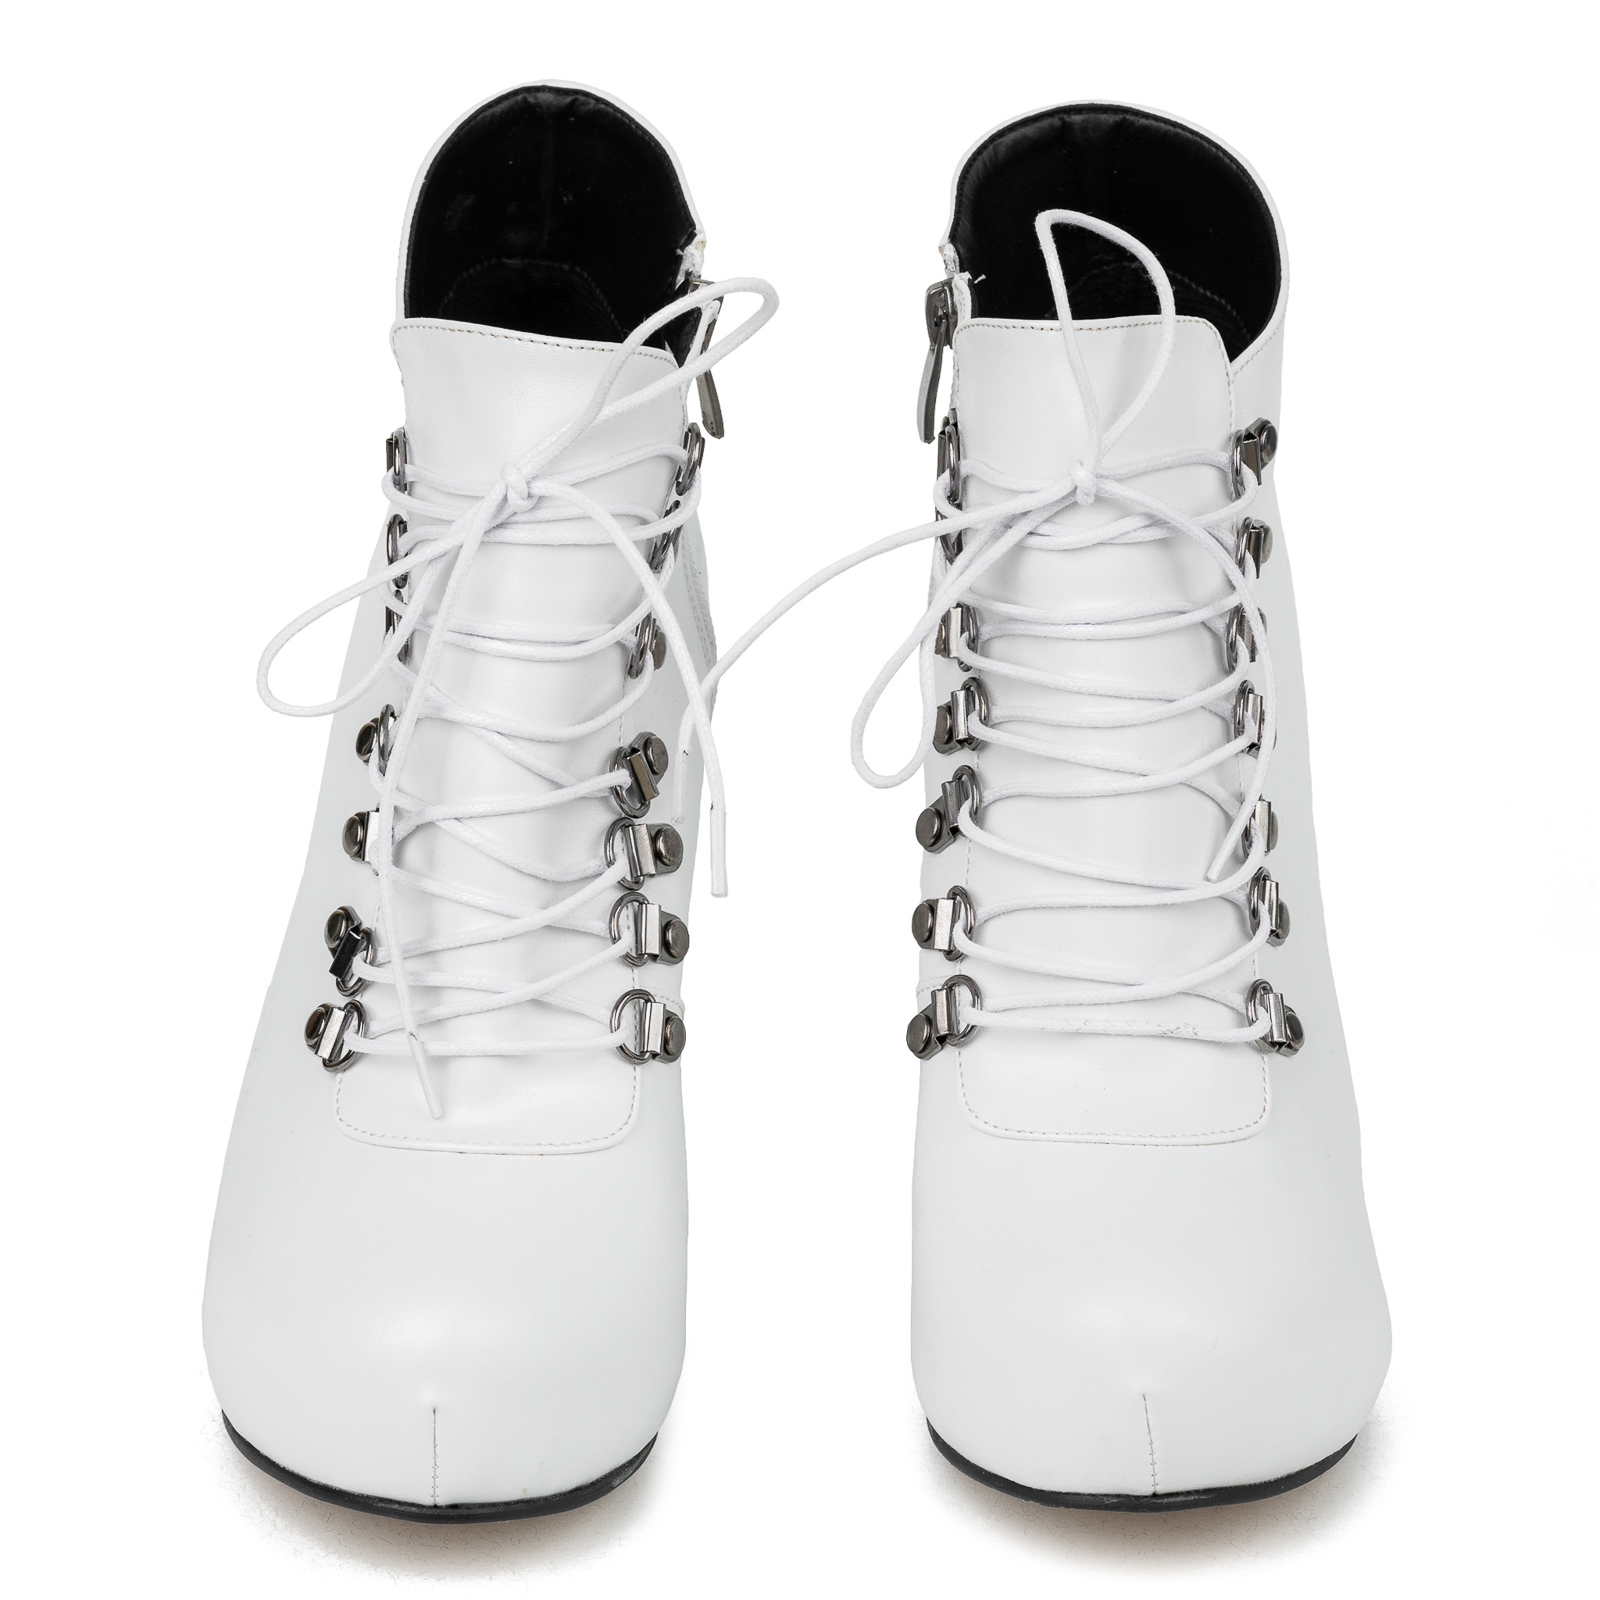 Women ankle boots B414 - WHITE